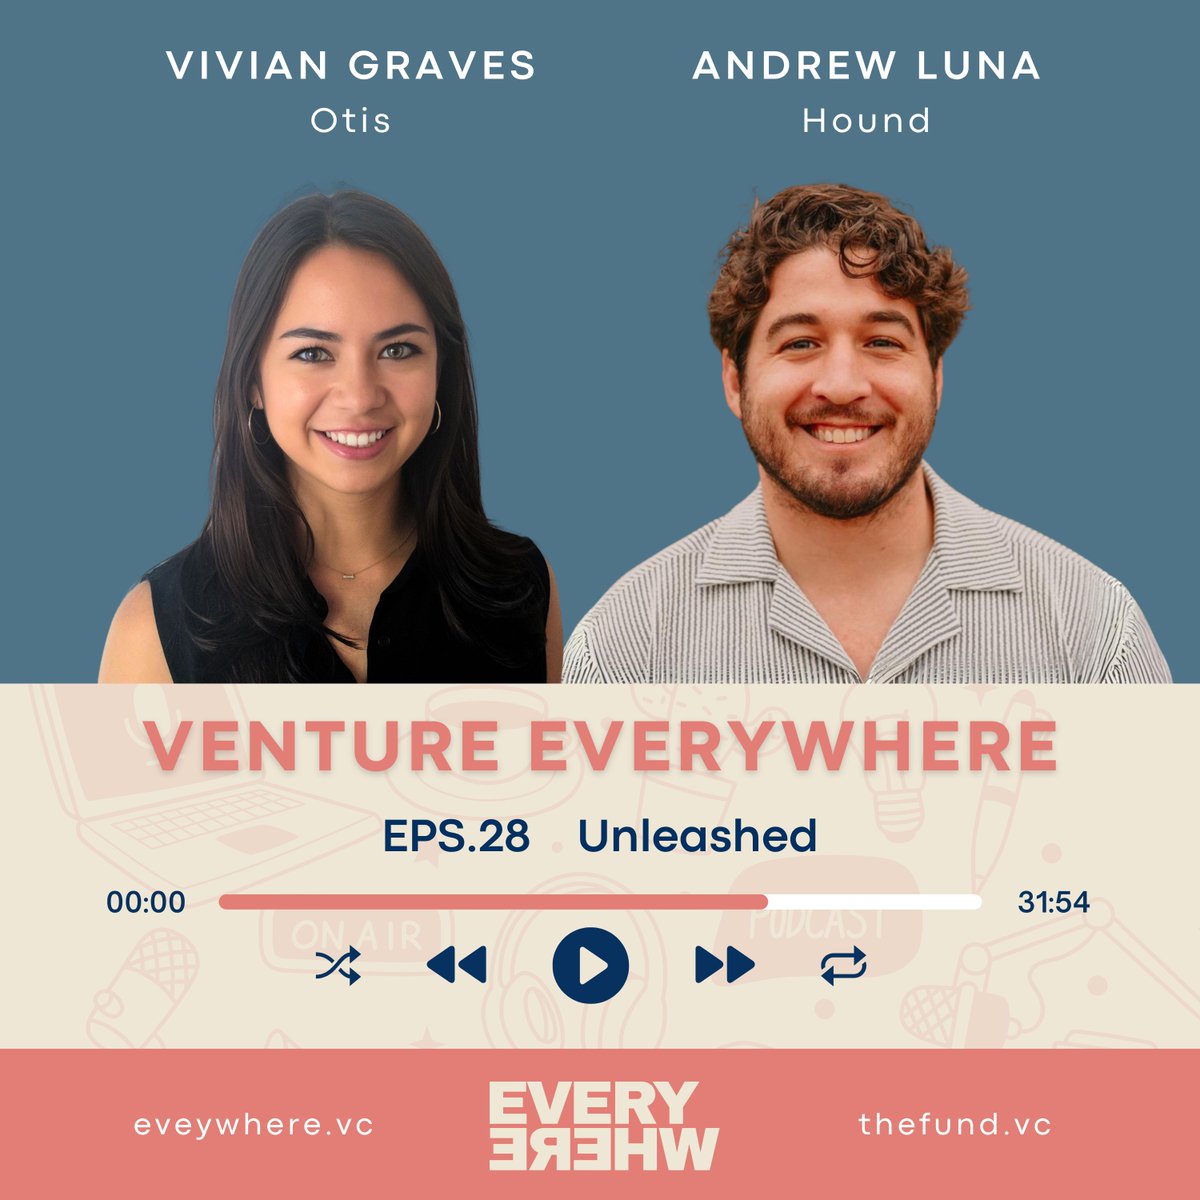 ON AIR: Venture Everywhere #Podcast EPS 28🎙️ Unleashed with @vivgraves, CEO of @otispet & Andrew Luna, CEO of hound.vet 🎧Listen now: 🍎 Apple: podcasts.apple.com/us/podcast/unl… 💚 Spotify: open.spotify.com/episode/43Lqi7… 🗒️ Transcript at ideas.everywhere.vc/s/podcast